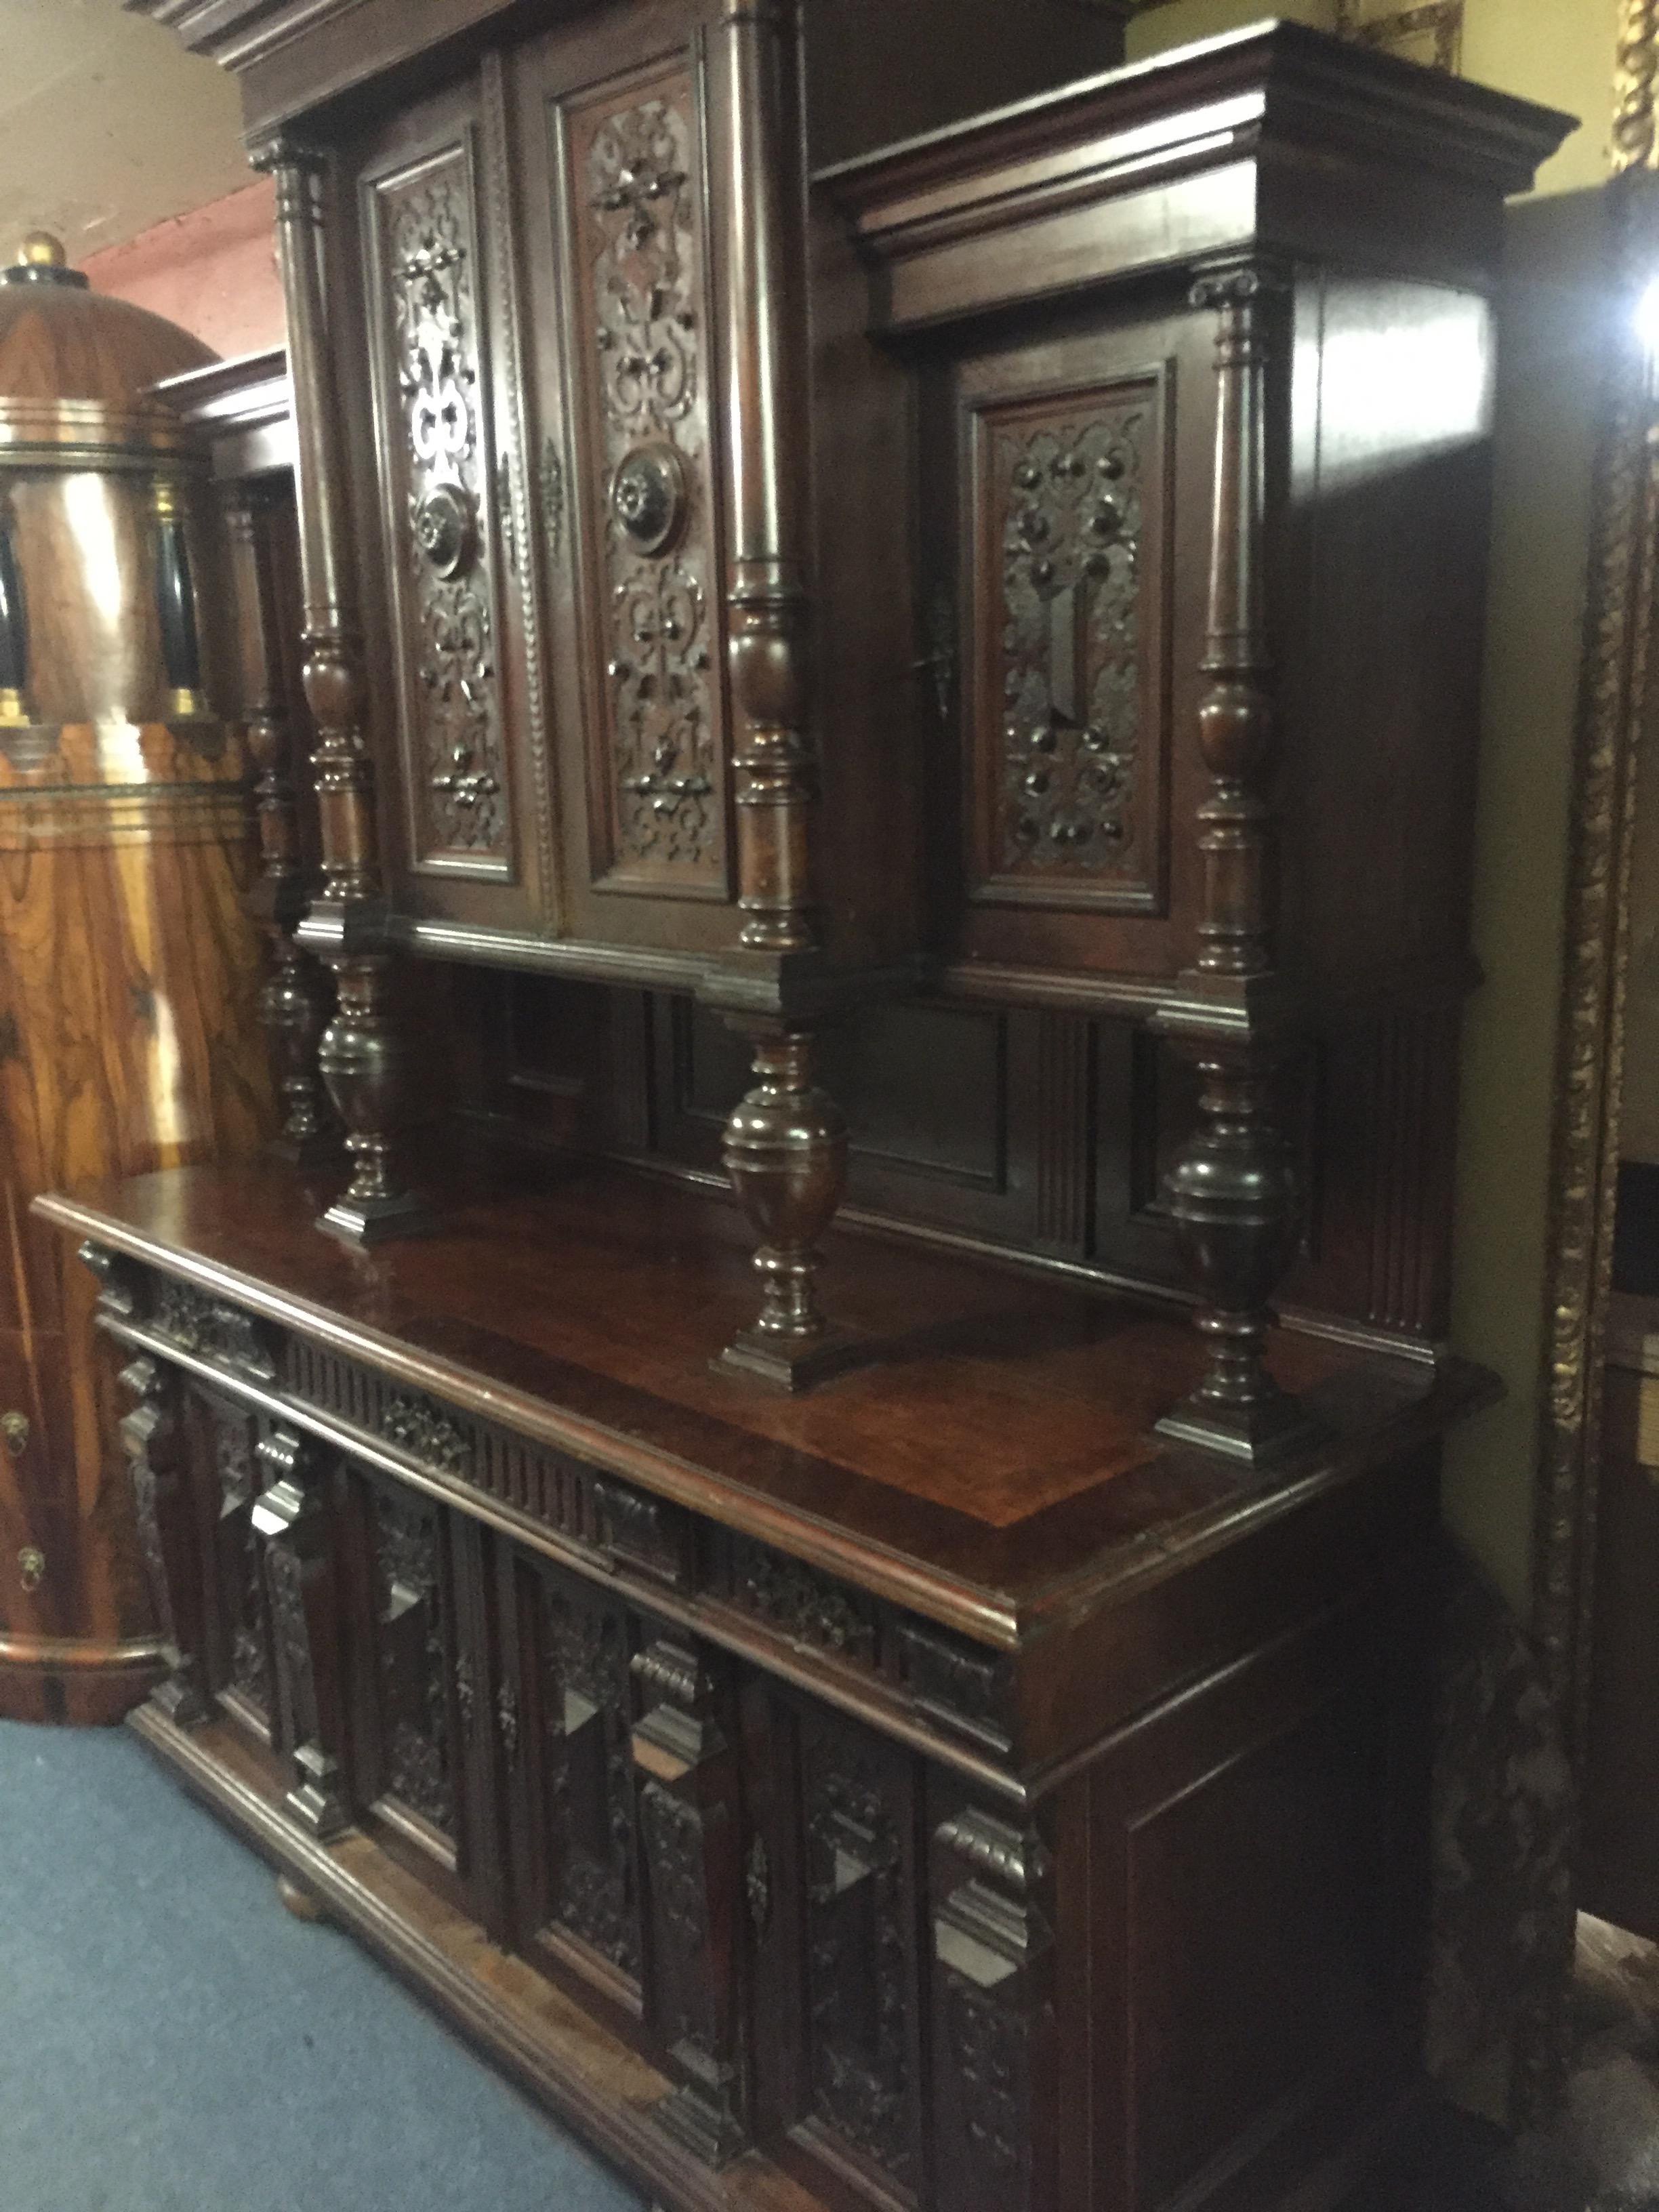 German master craftsmanship
Monumental Wilhelminian Buffet, circa 1880 walnut, carved paneling framed by full columns.
Consisting of 2 parts
Dimensions:
Width:190 cm
Height:245 cm
Depth:73 cm.